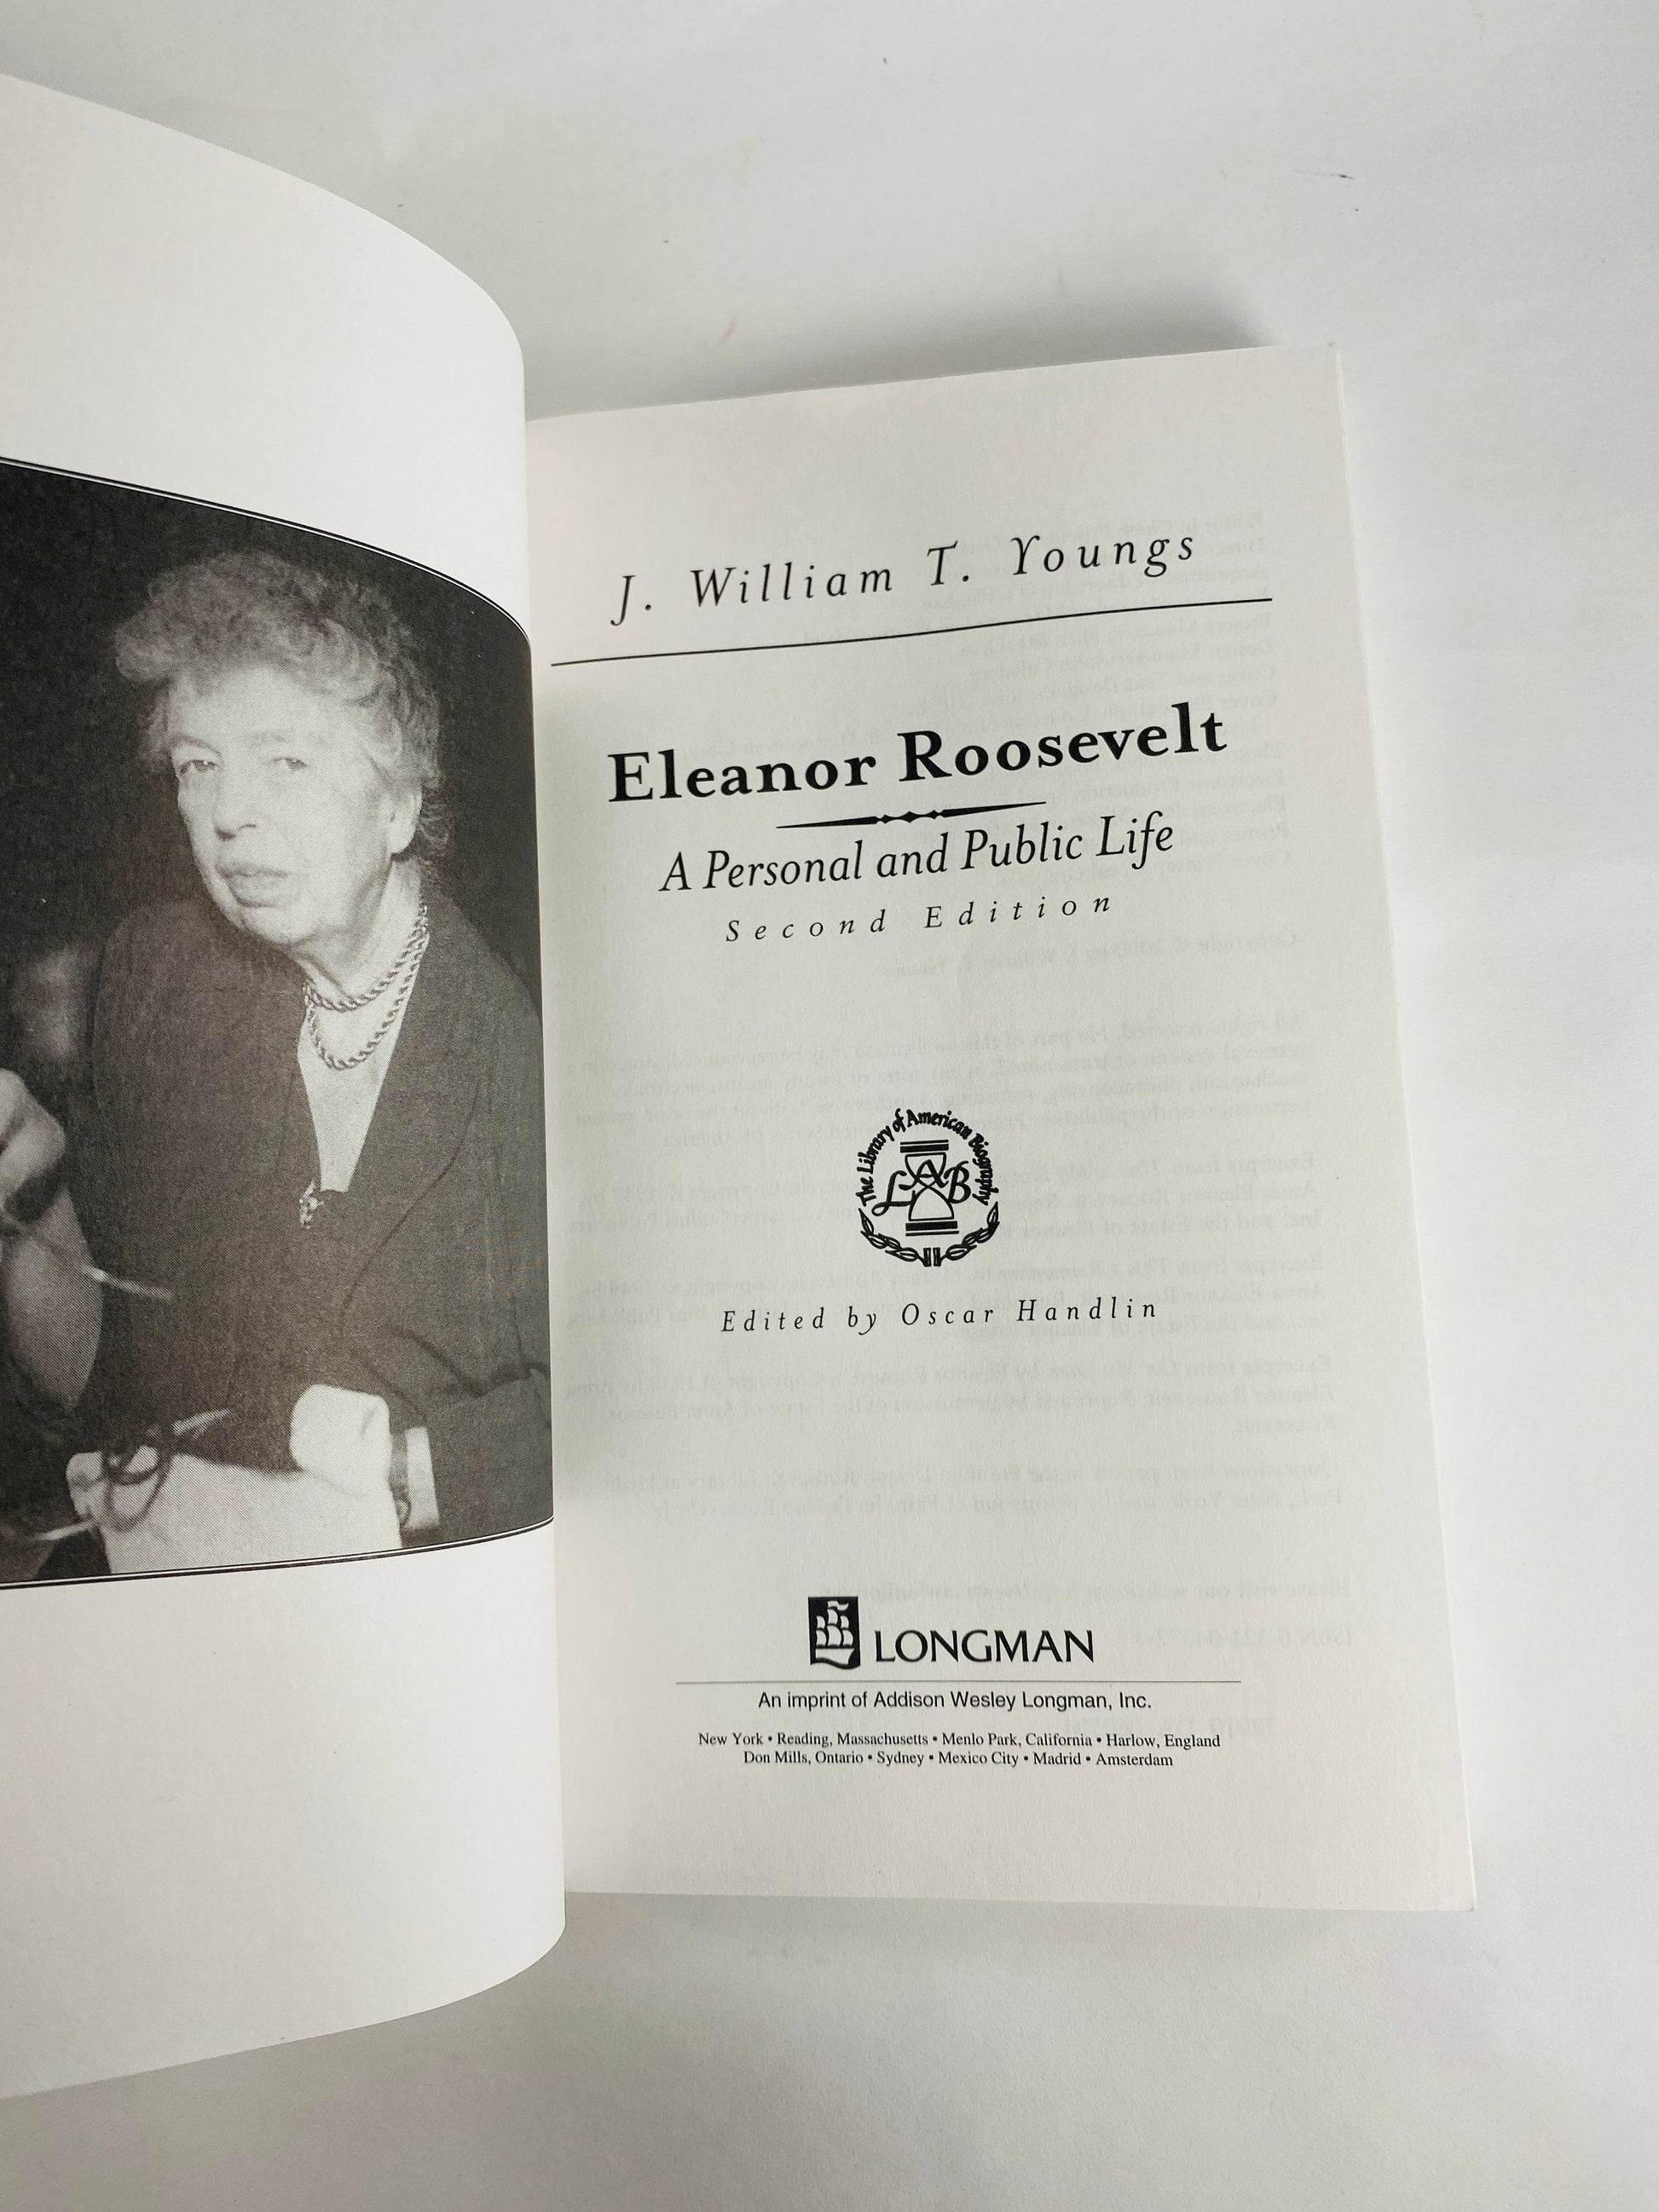 Eleanor Roosevelt biography vintage paperback book by J William Youngs about the former First Lady